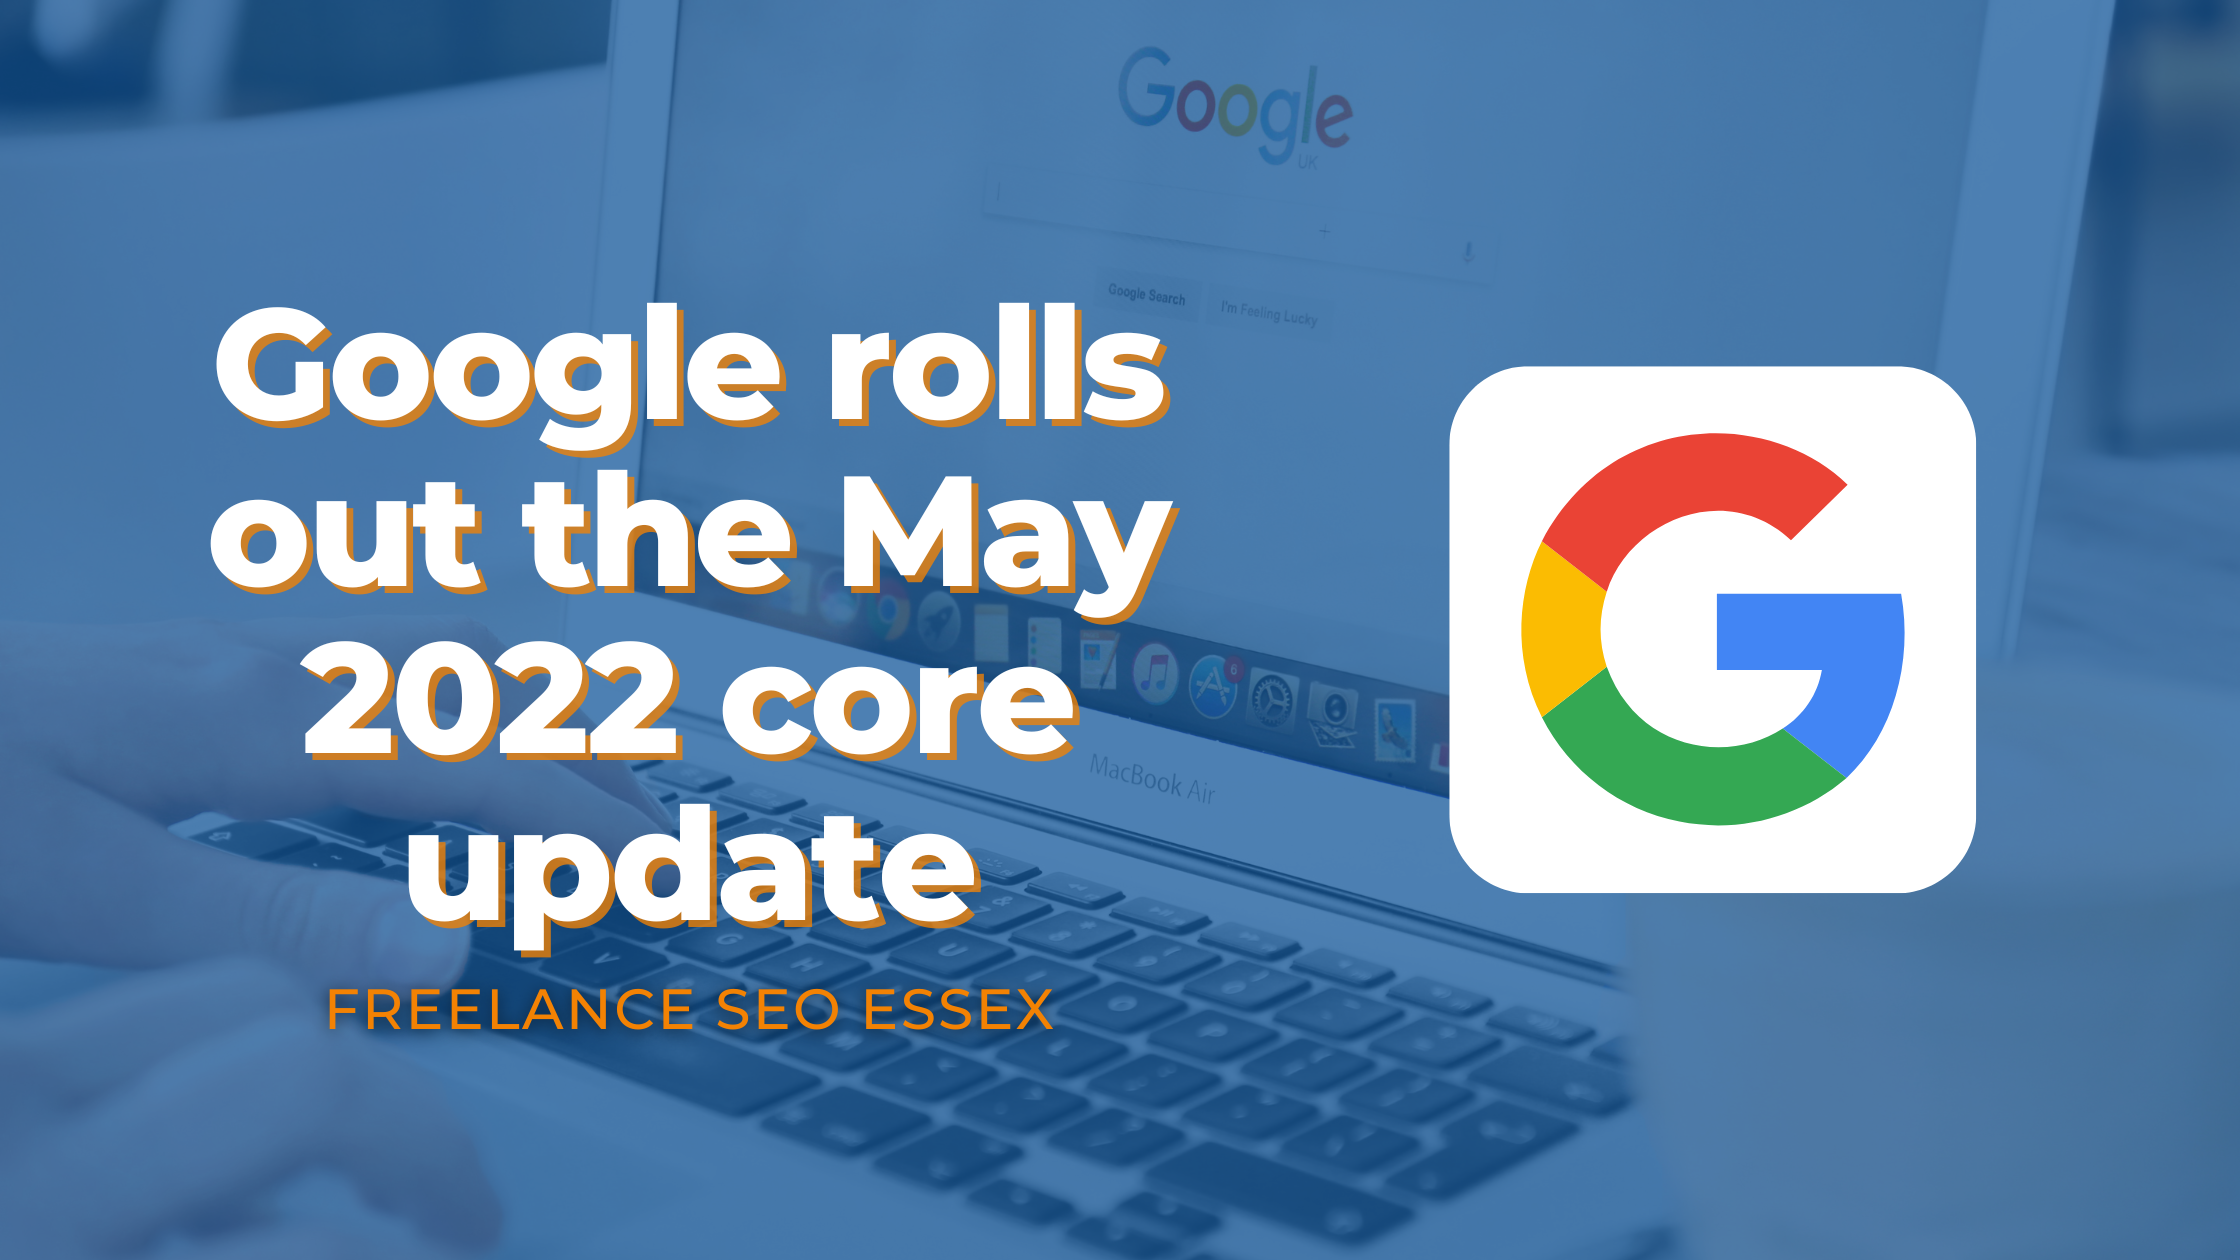 Google rolls out the May 2022 core update